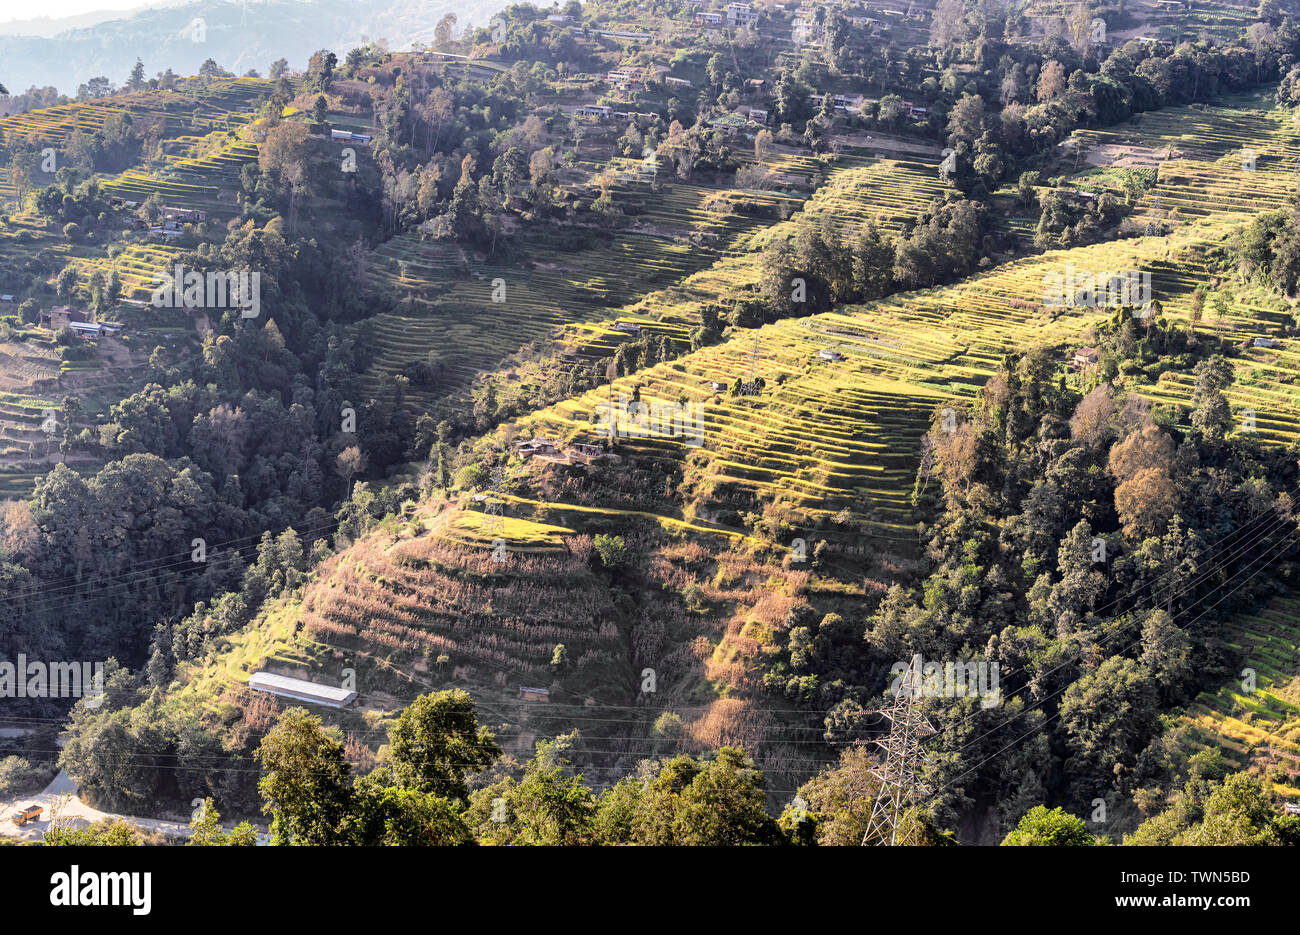 Landscape view at agriculture terraces in the rural area in Kathmandu Valley near Kokani, Nepal Stock Photo